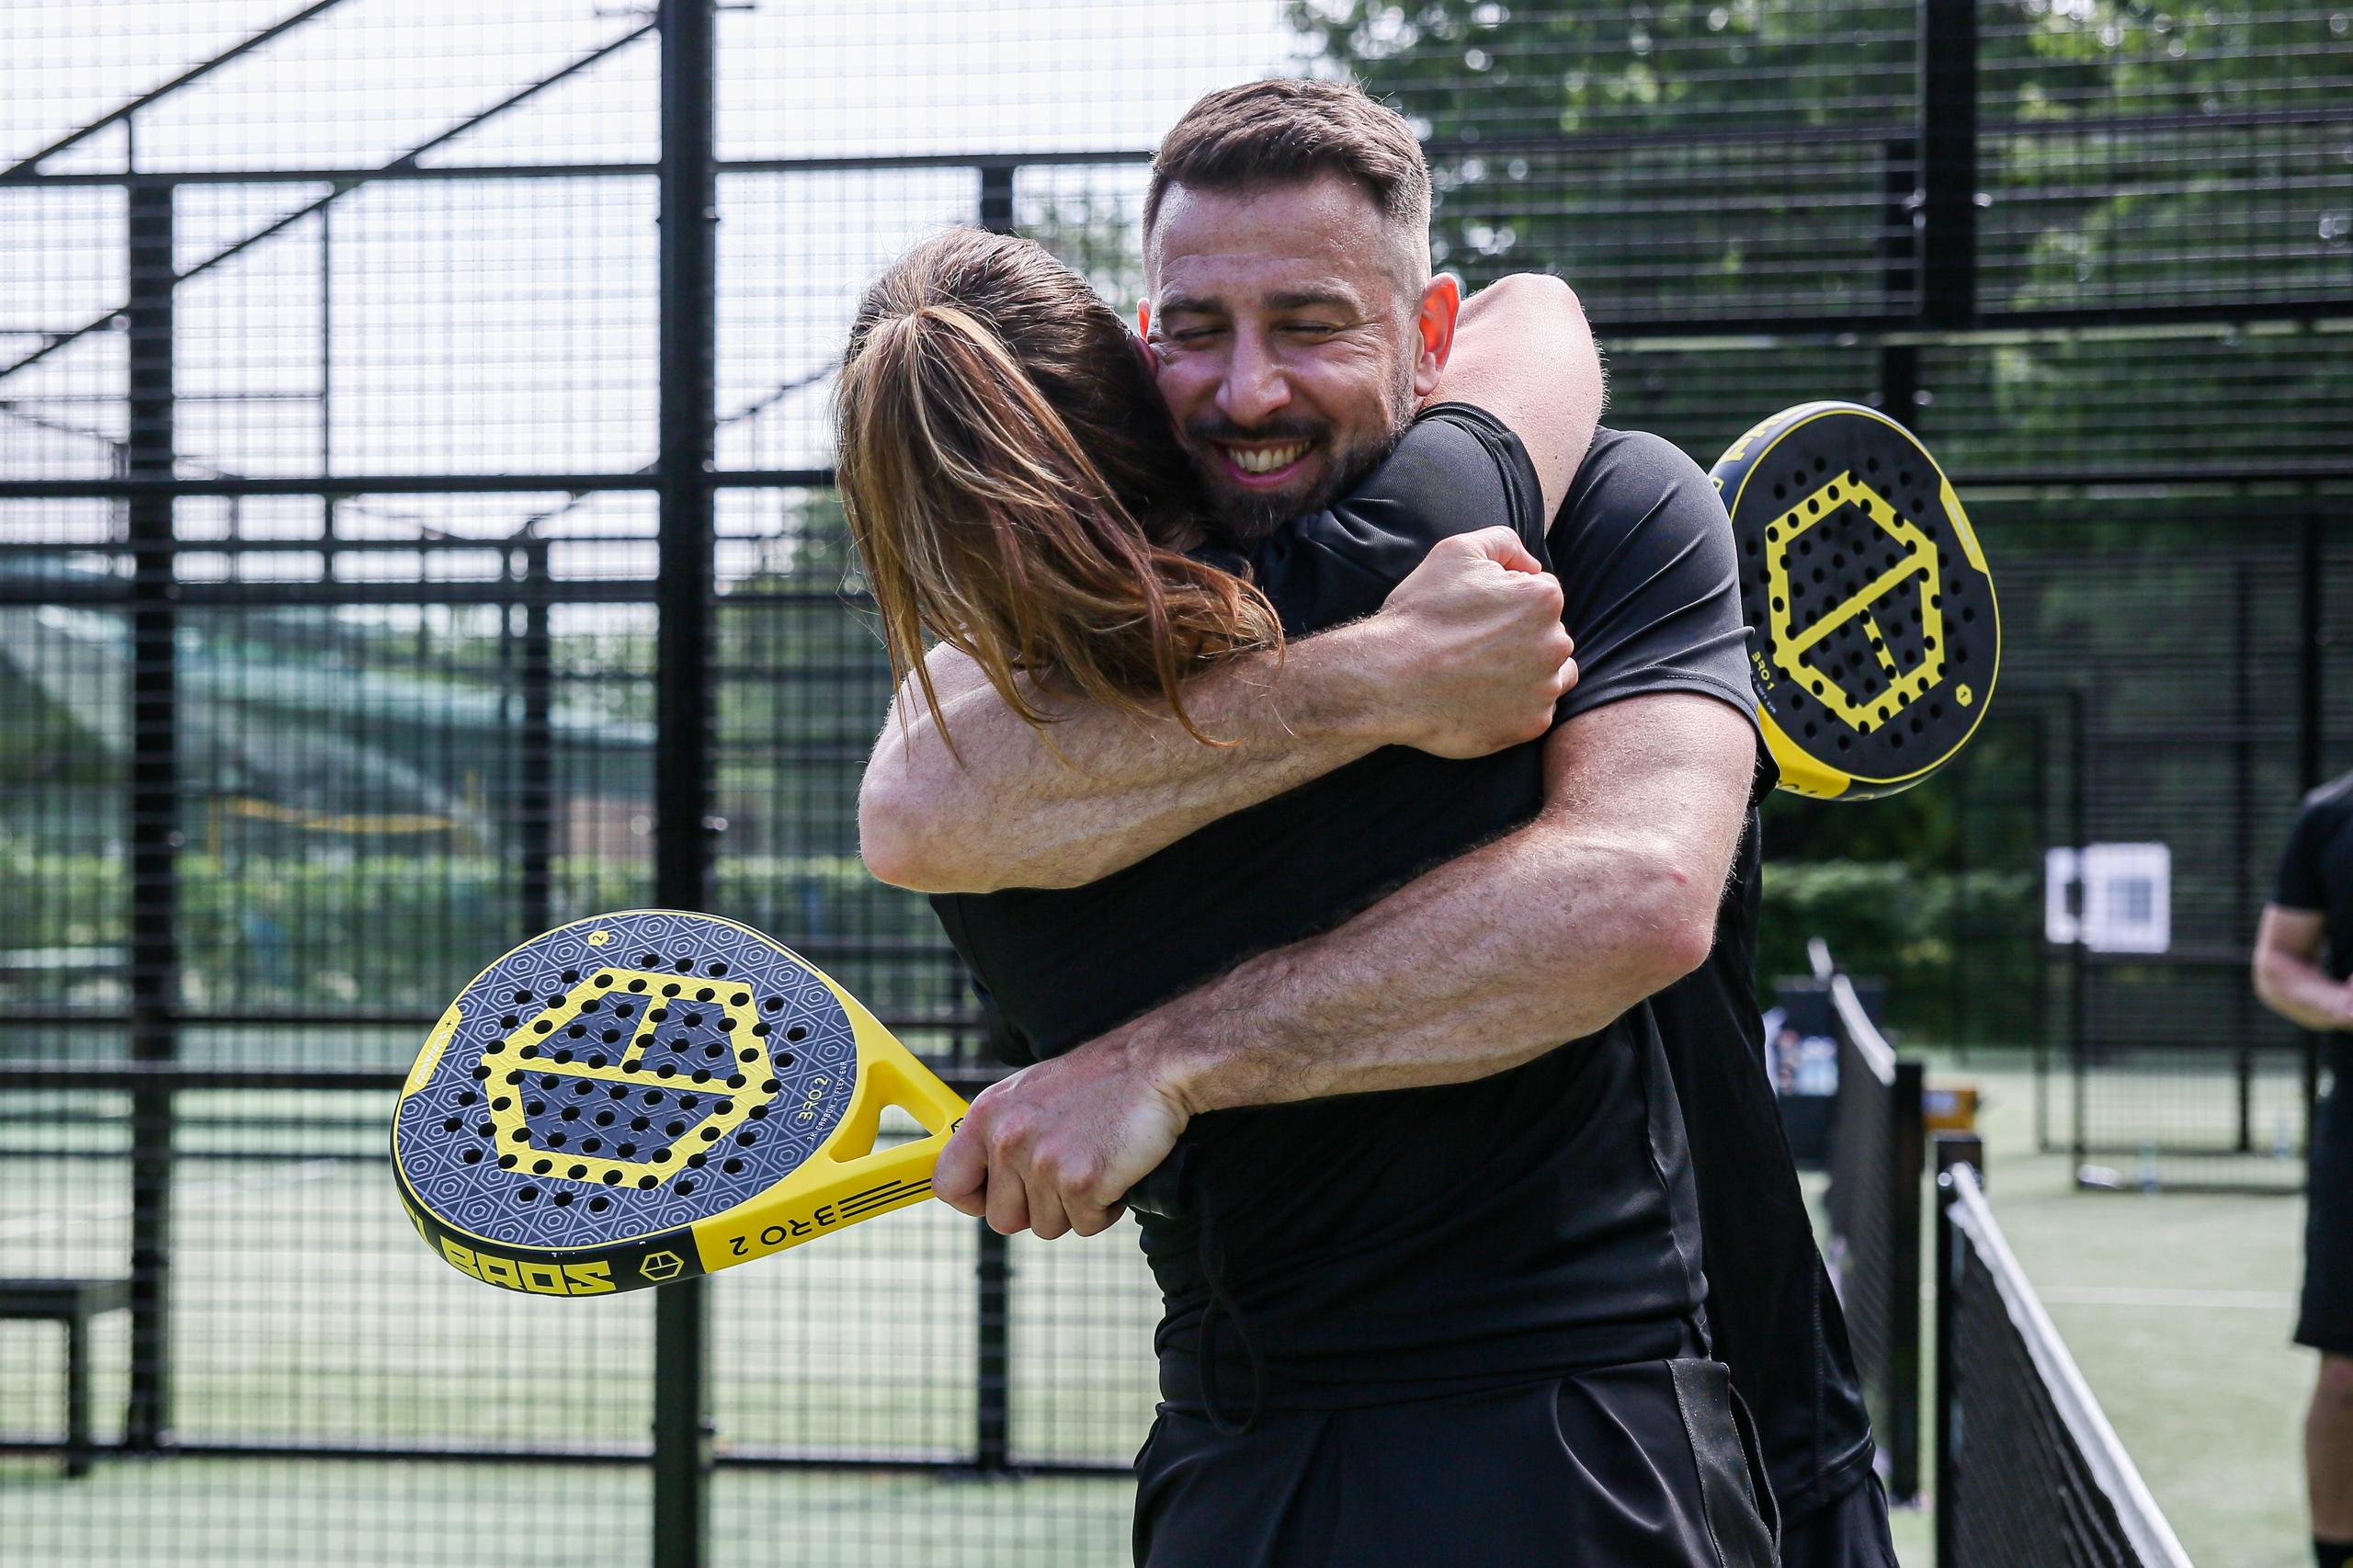 Ace Your Health: The Padel Advantage - A Deep Dive into the Health Benefits